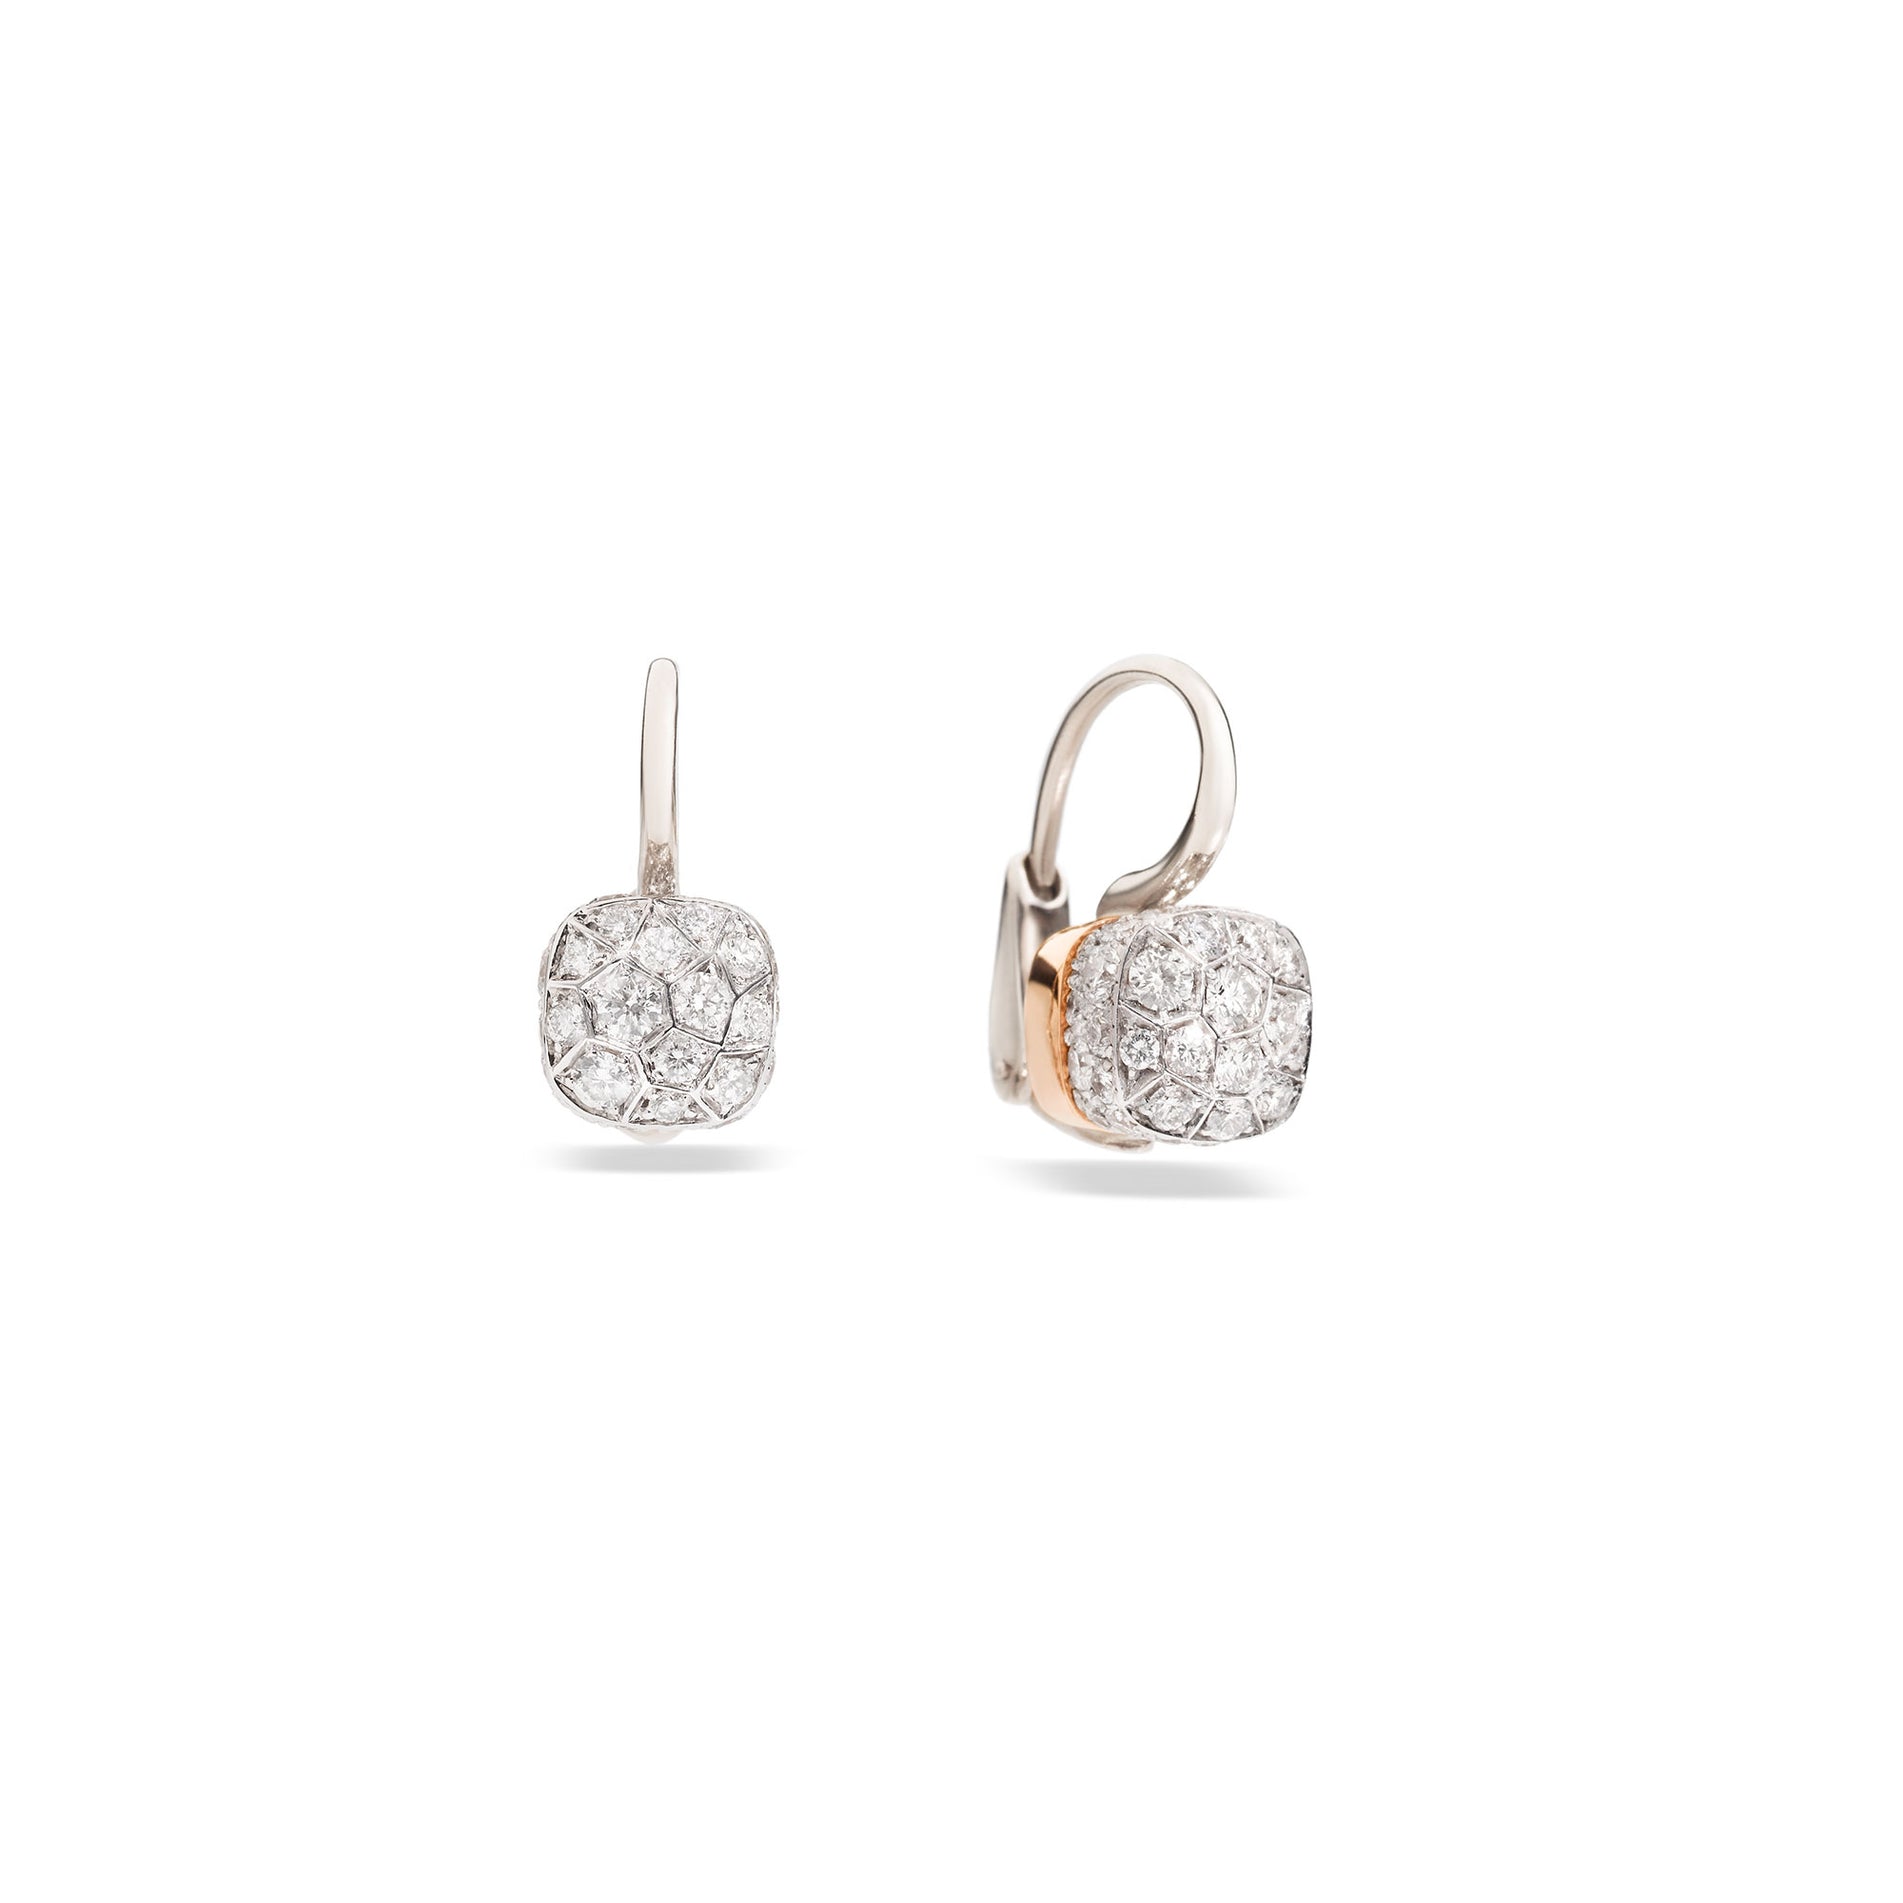 Nudo Petit Earrings in 18k Rose and White Gold with Diamonds - Orsini Jewellers NZ